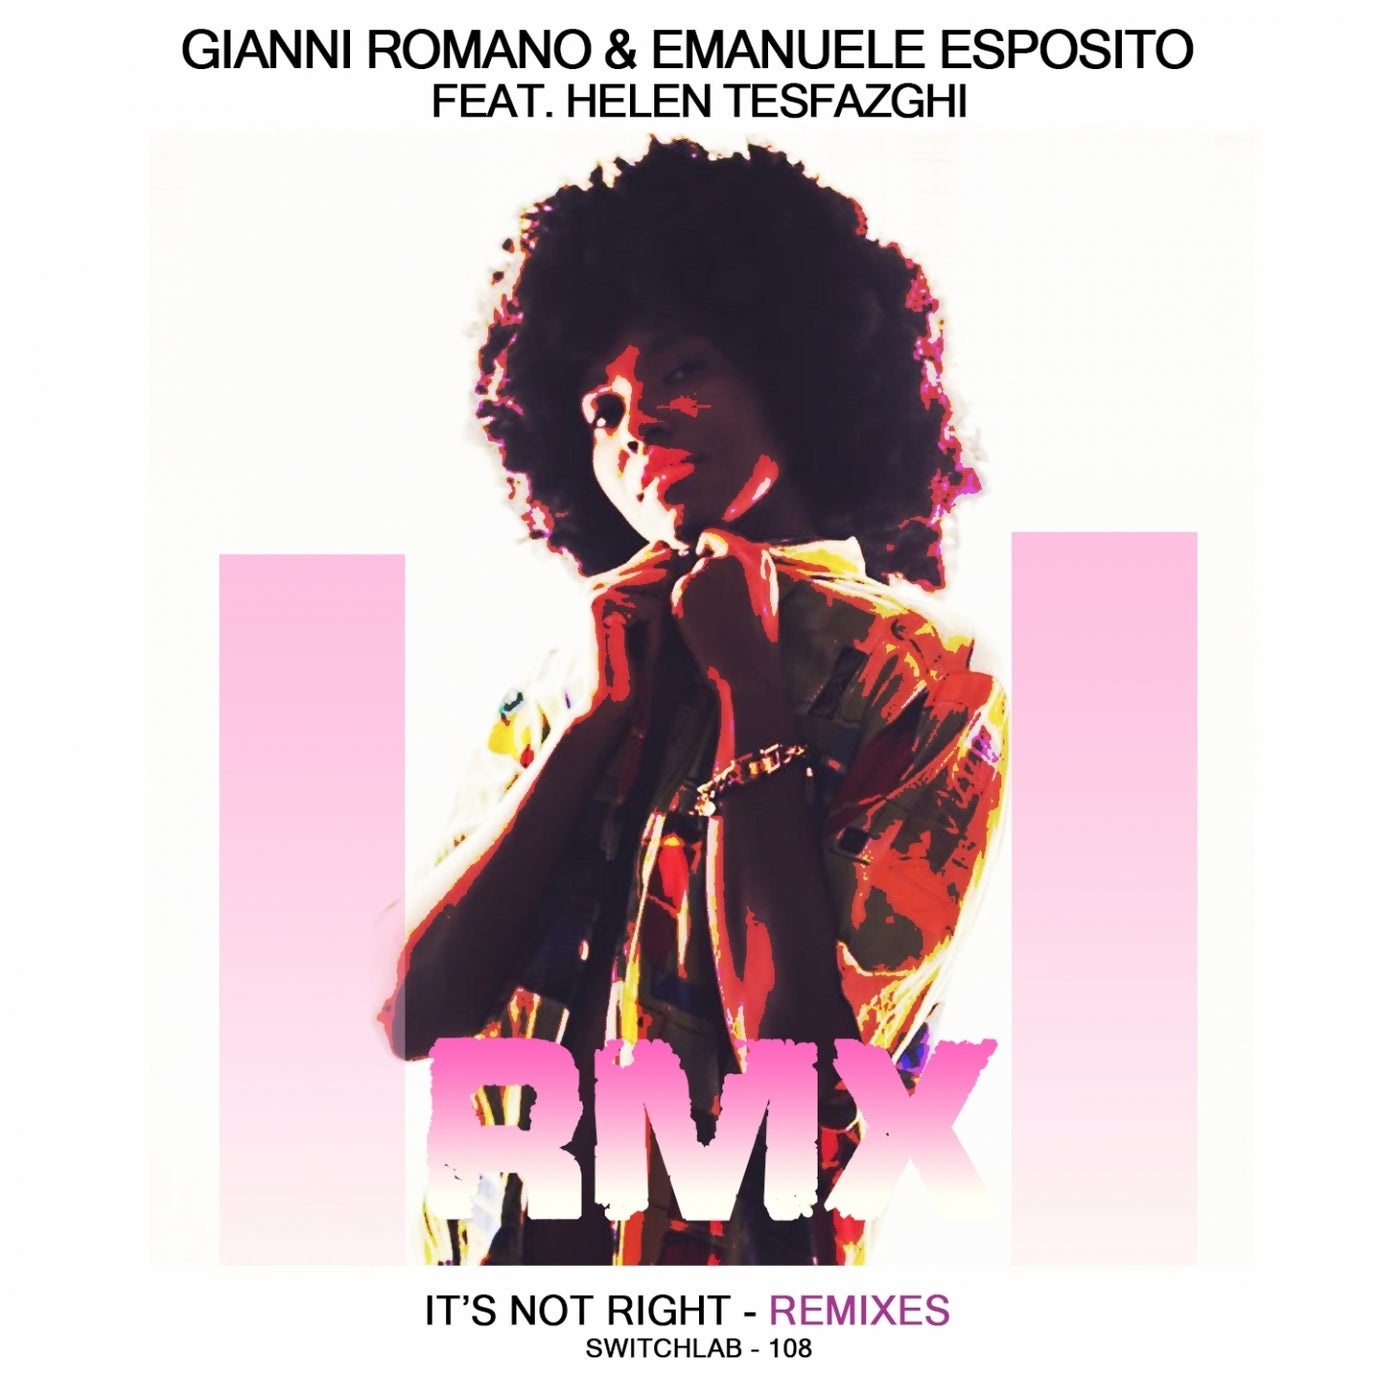 Emanuele Esposito, Gianni Romano - It's Not Right (feat. Helen Tesfazghi) [Remixes] [SWITCHLAB108]